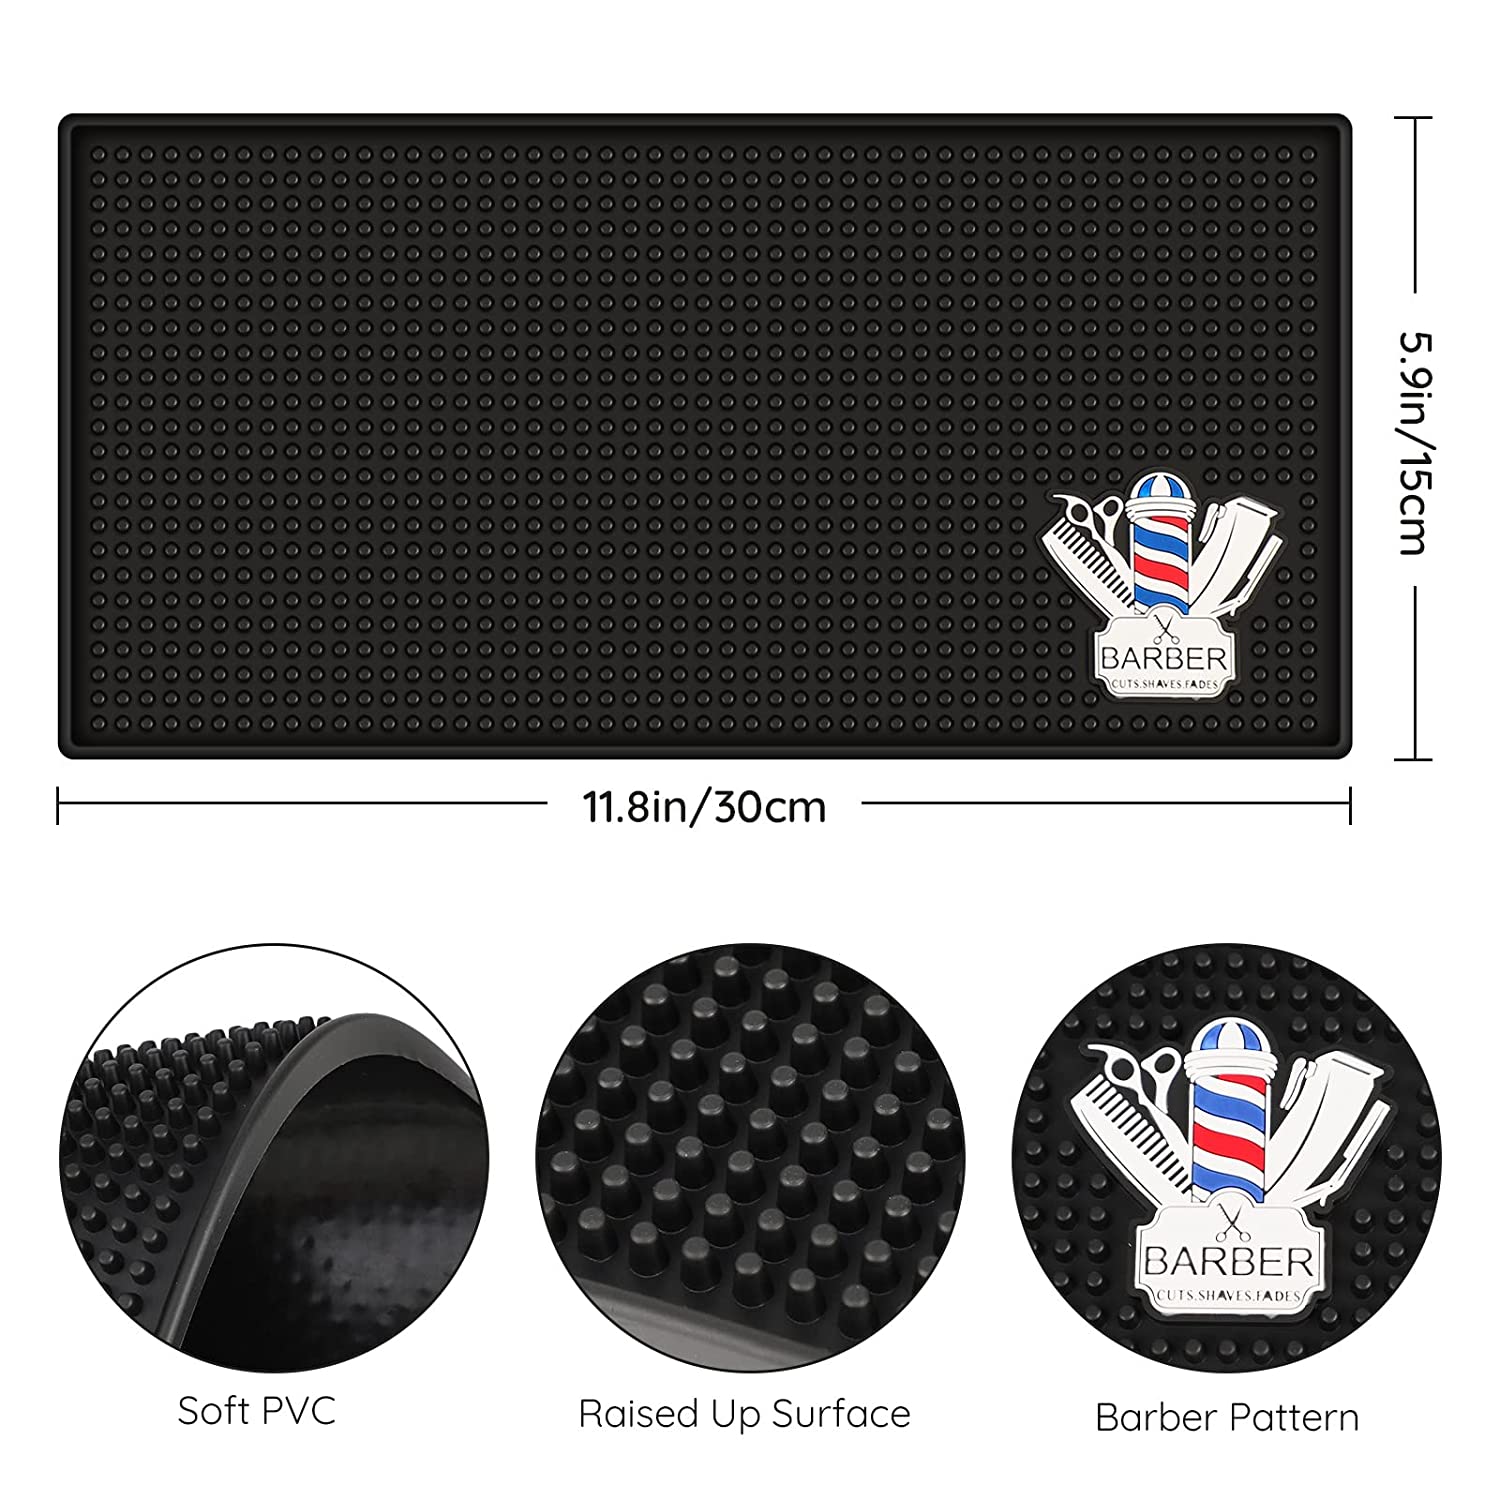 LEVEL3 Silicone Station Mat - Capelli Beauty & Barber Supply